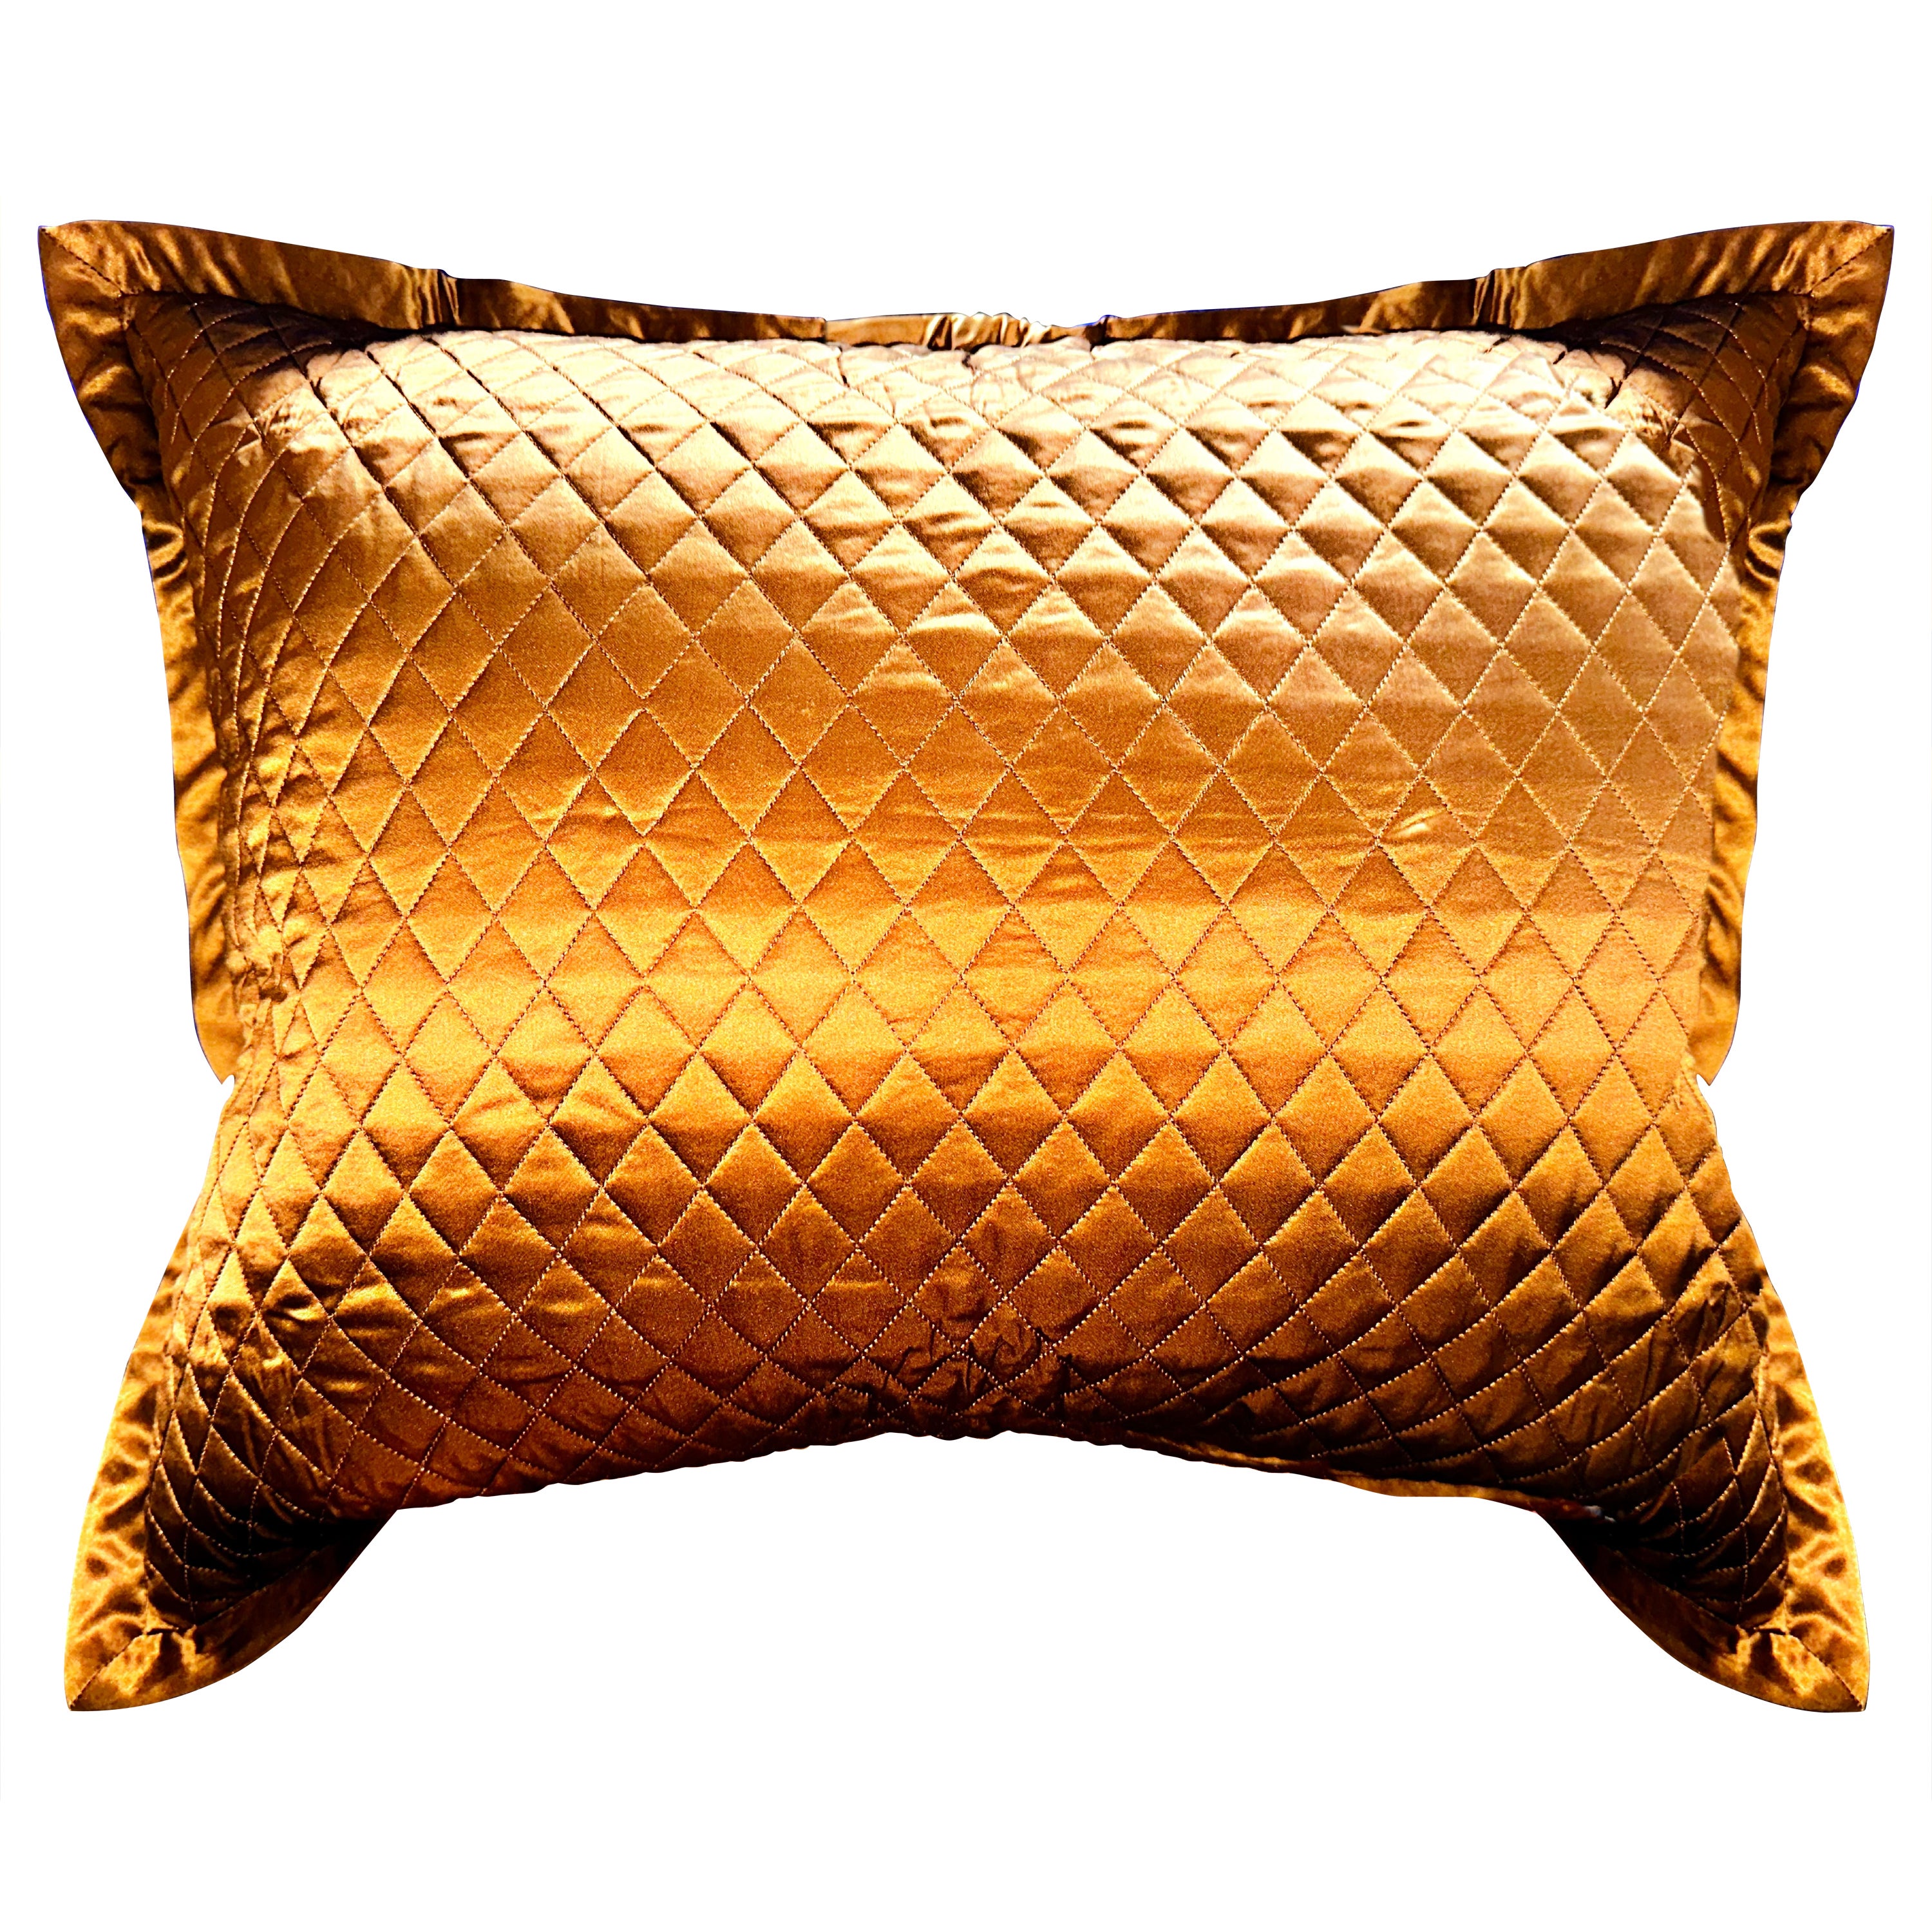 Silk Charmeuse Diamond Quilted Standard Pillow sham with flange, Cognac, Amber For Sale